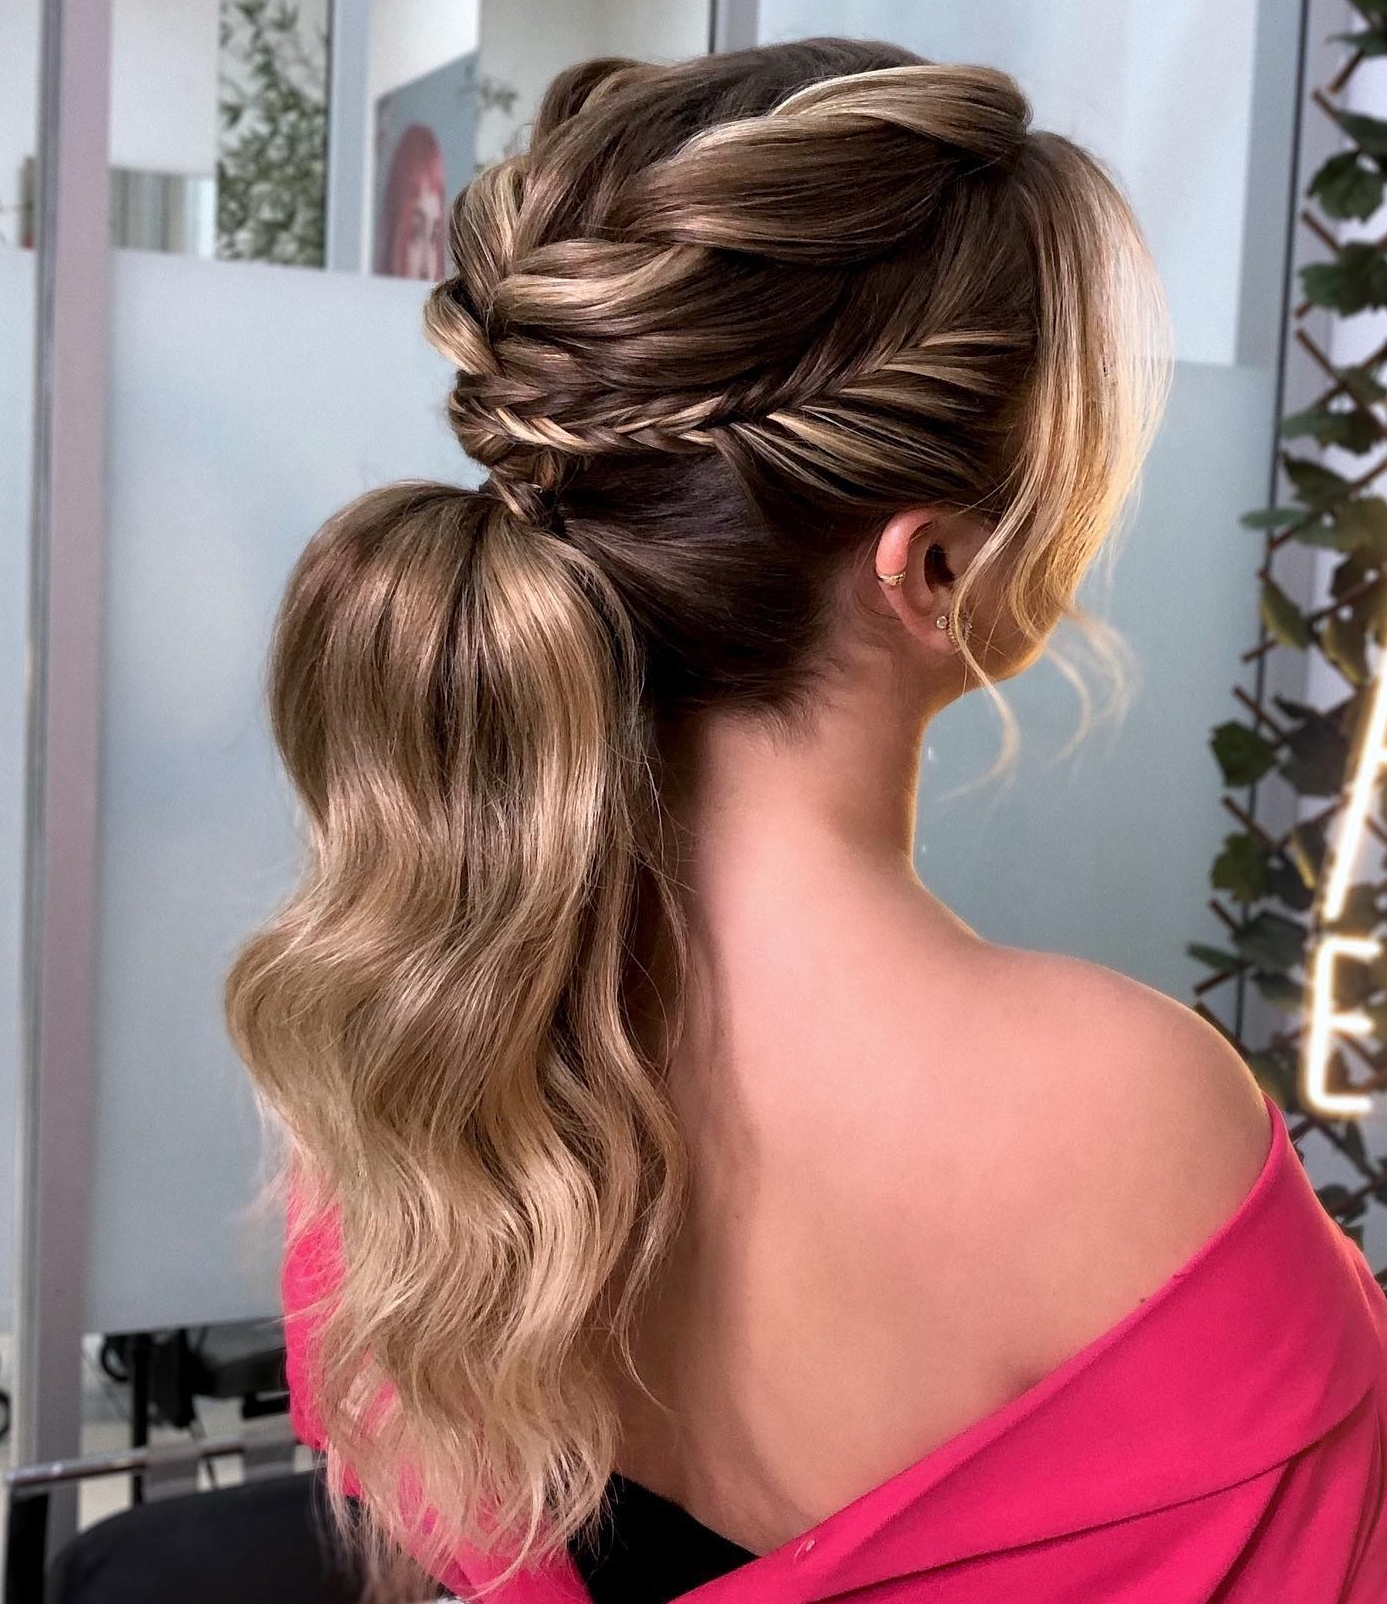 Ponytail Updo On Long Hair with Highlights